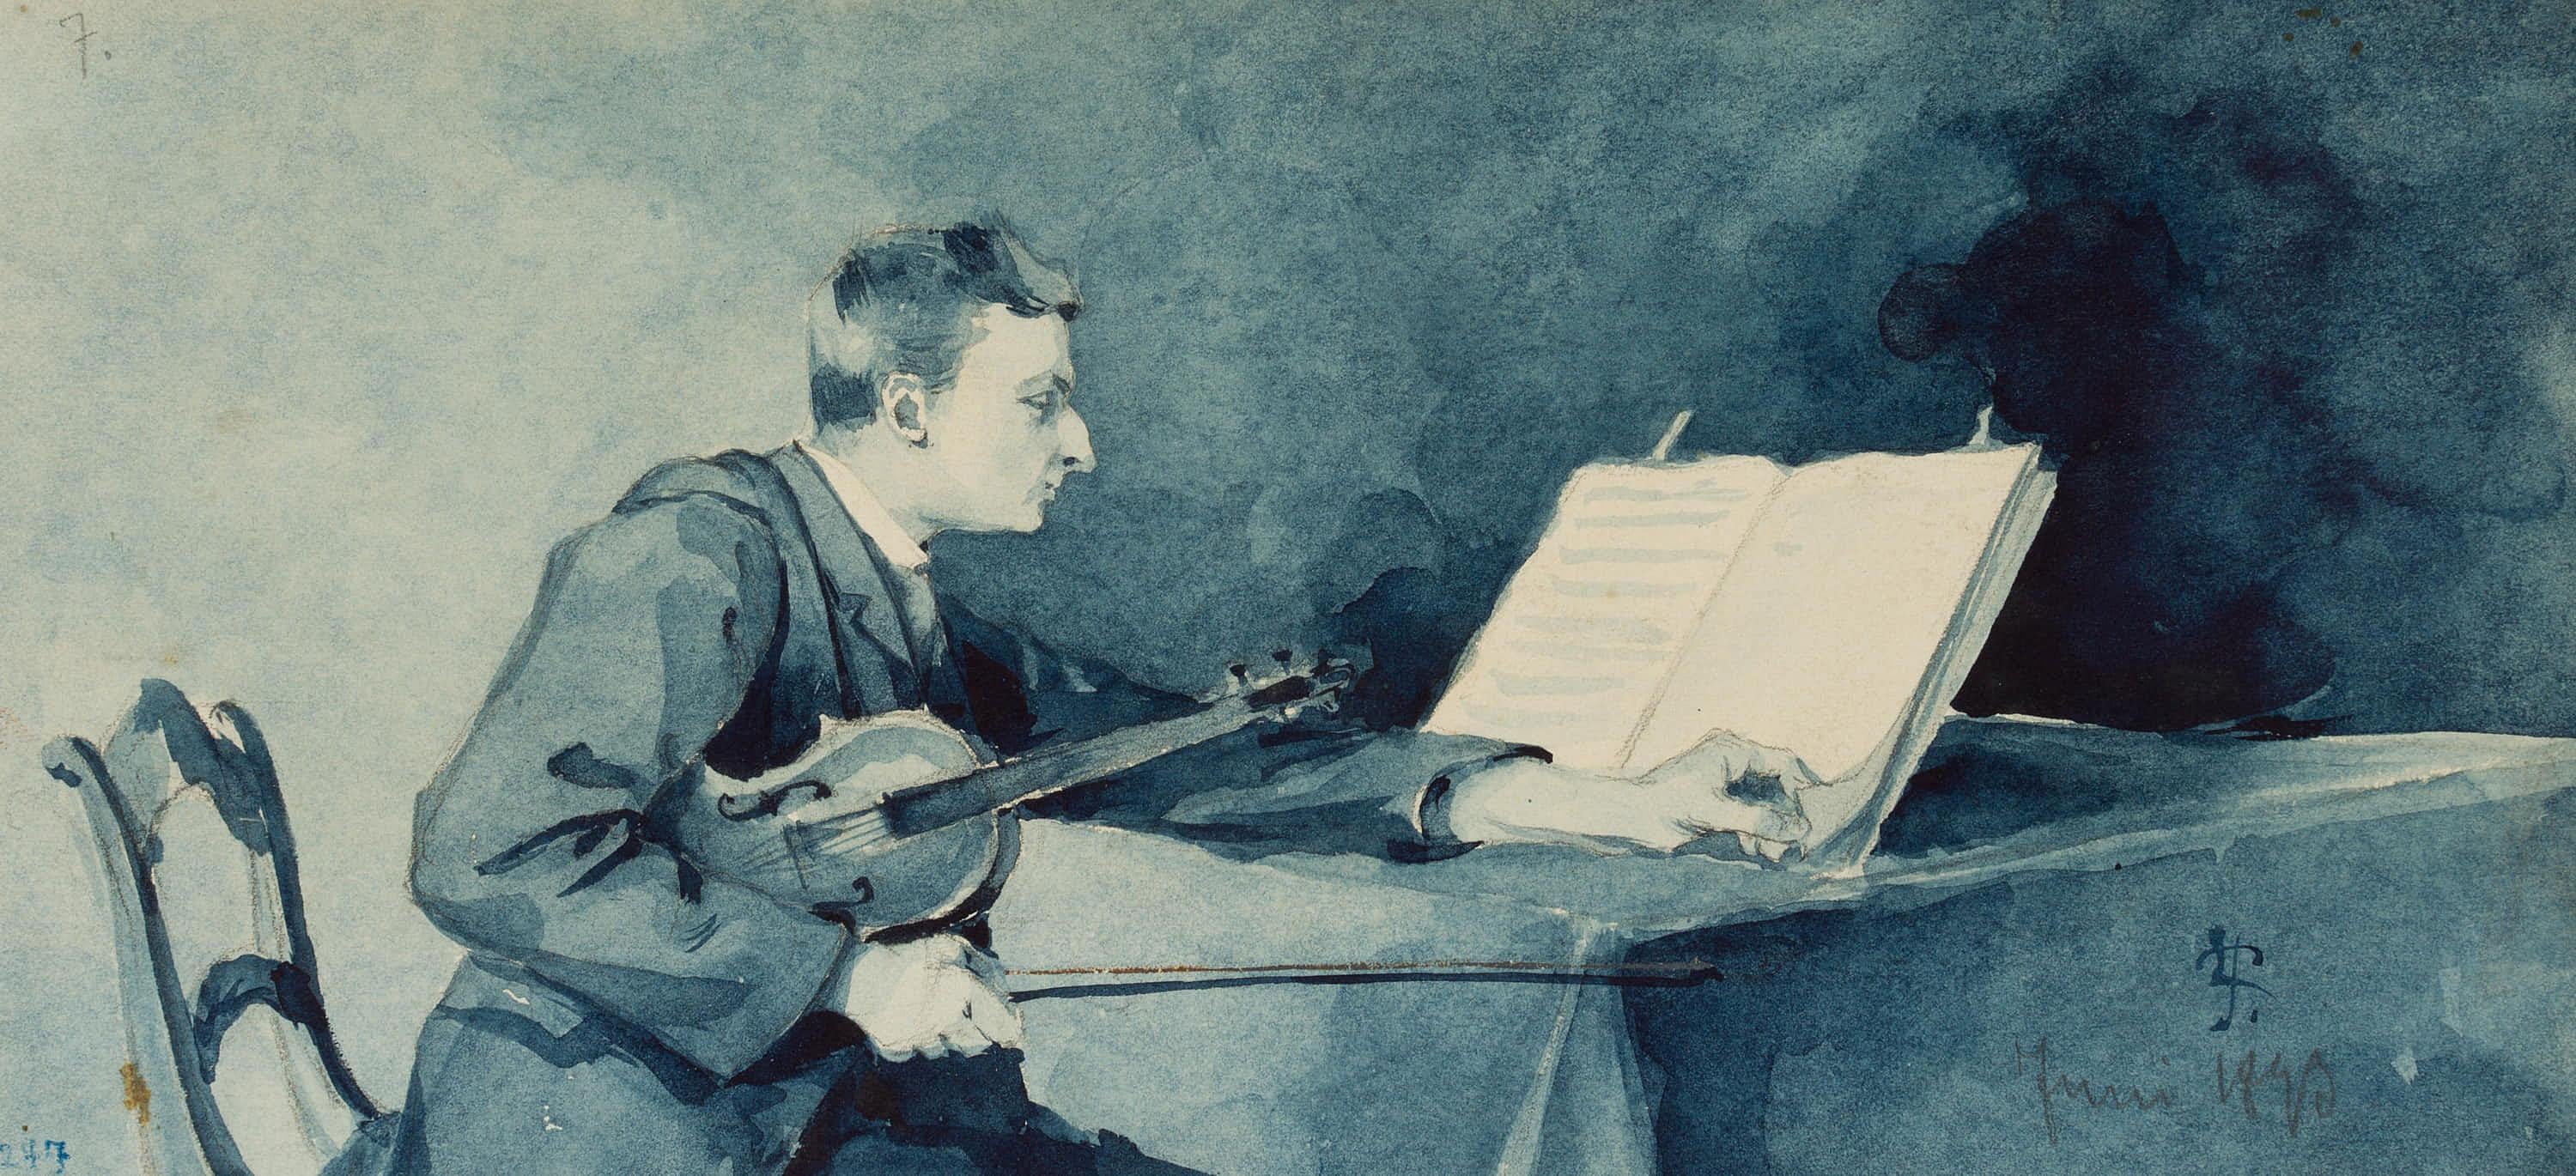 Leo Primavesi (1871 Cologne - after 1937 ): The blue hour Violin players studying music, 1899, Watercolor

Technique: Watercolor on Paper

Inscription: Lower right monogrammed: 